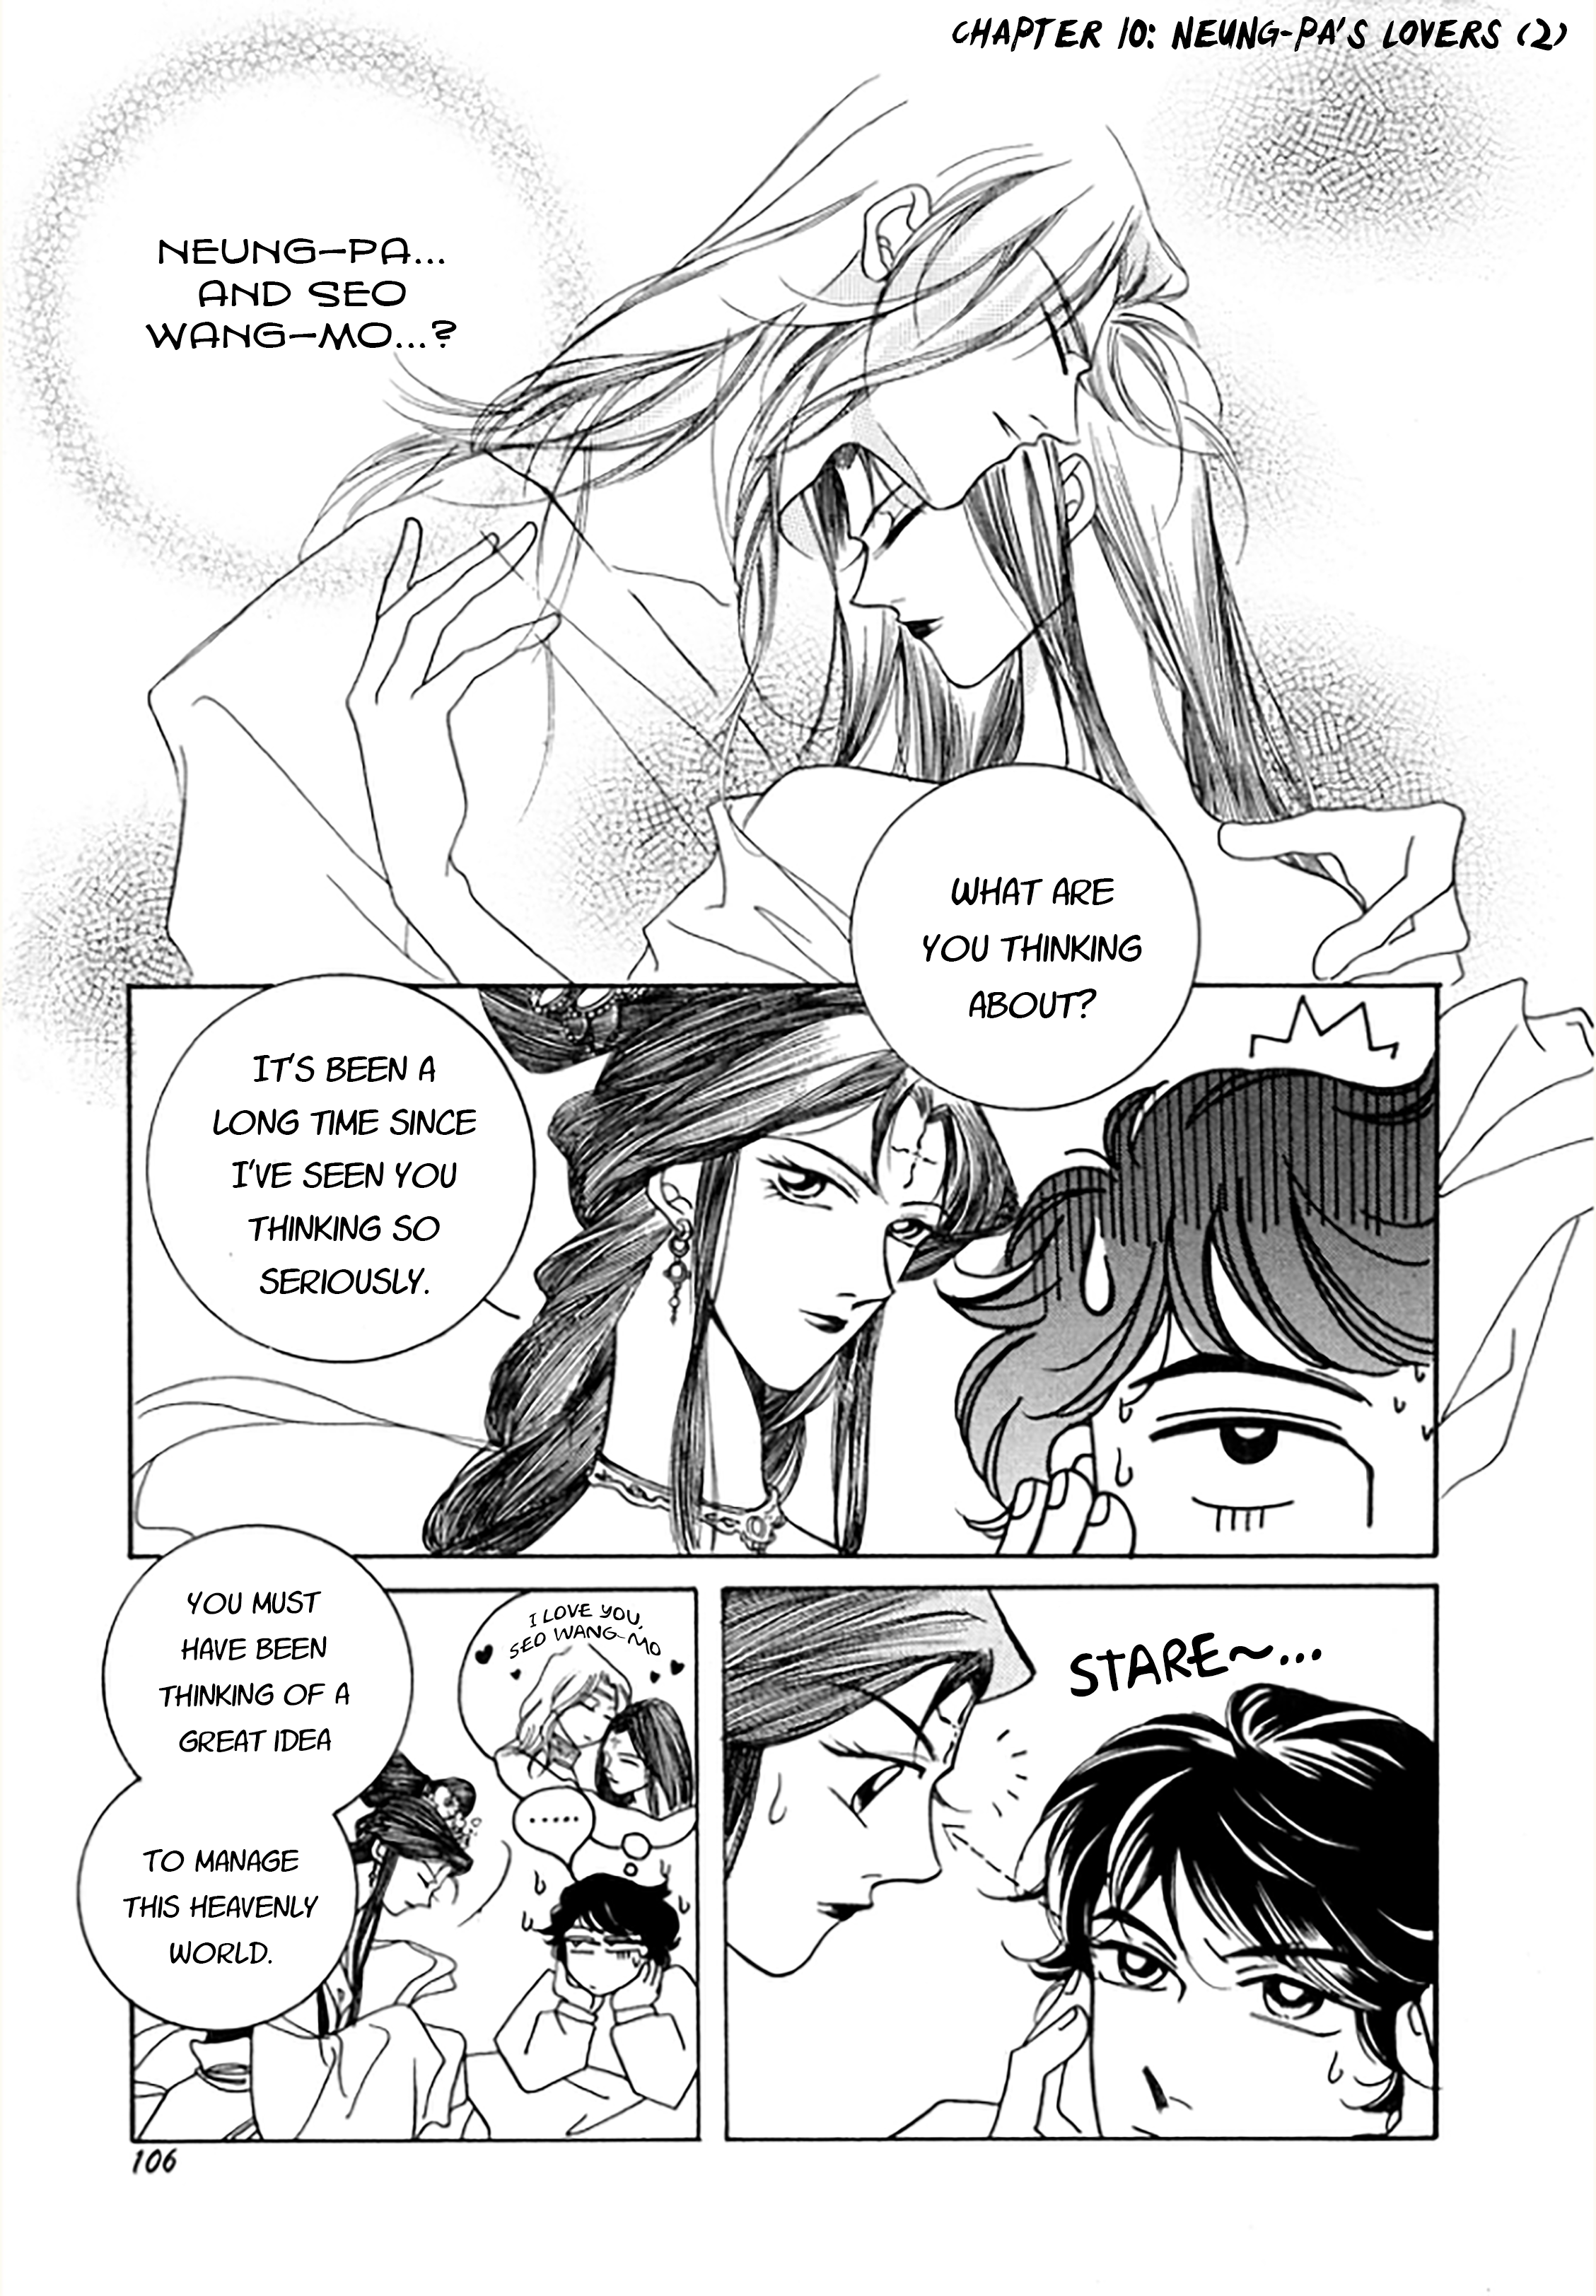 West Heaven Garden Vol.2 Chapter 10: Neung-Pa's Lovers (2) - Picture 1